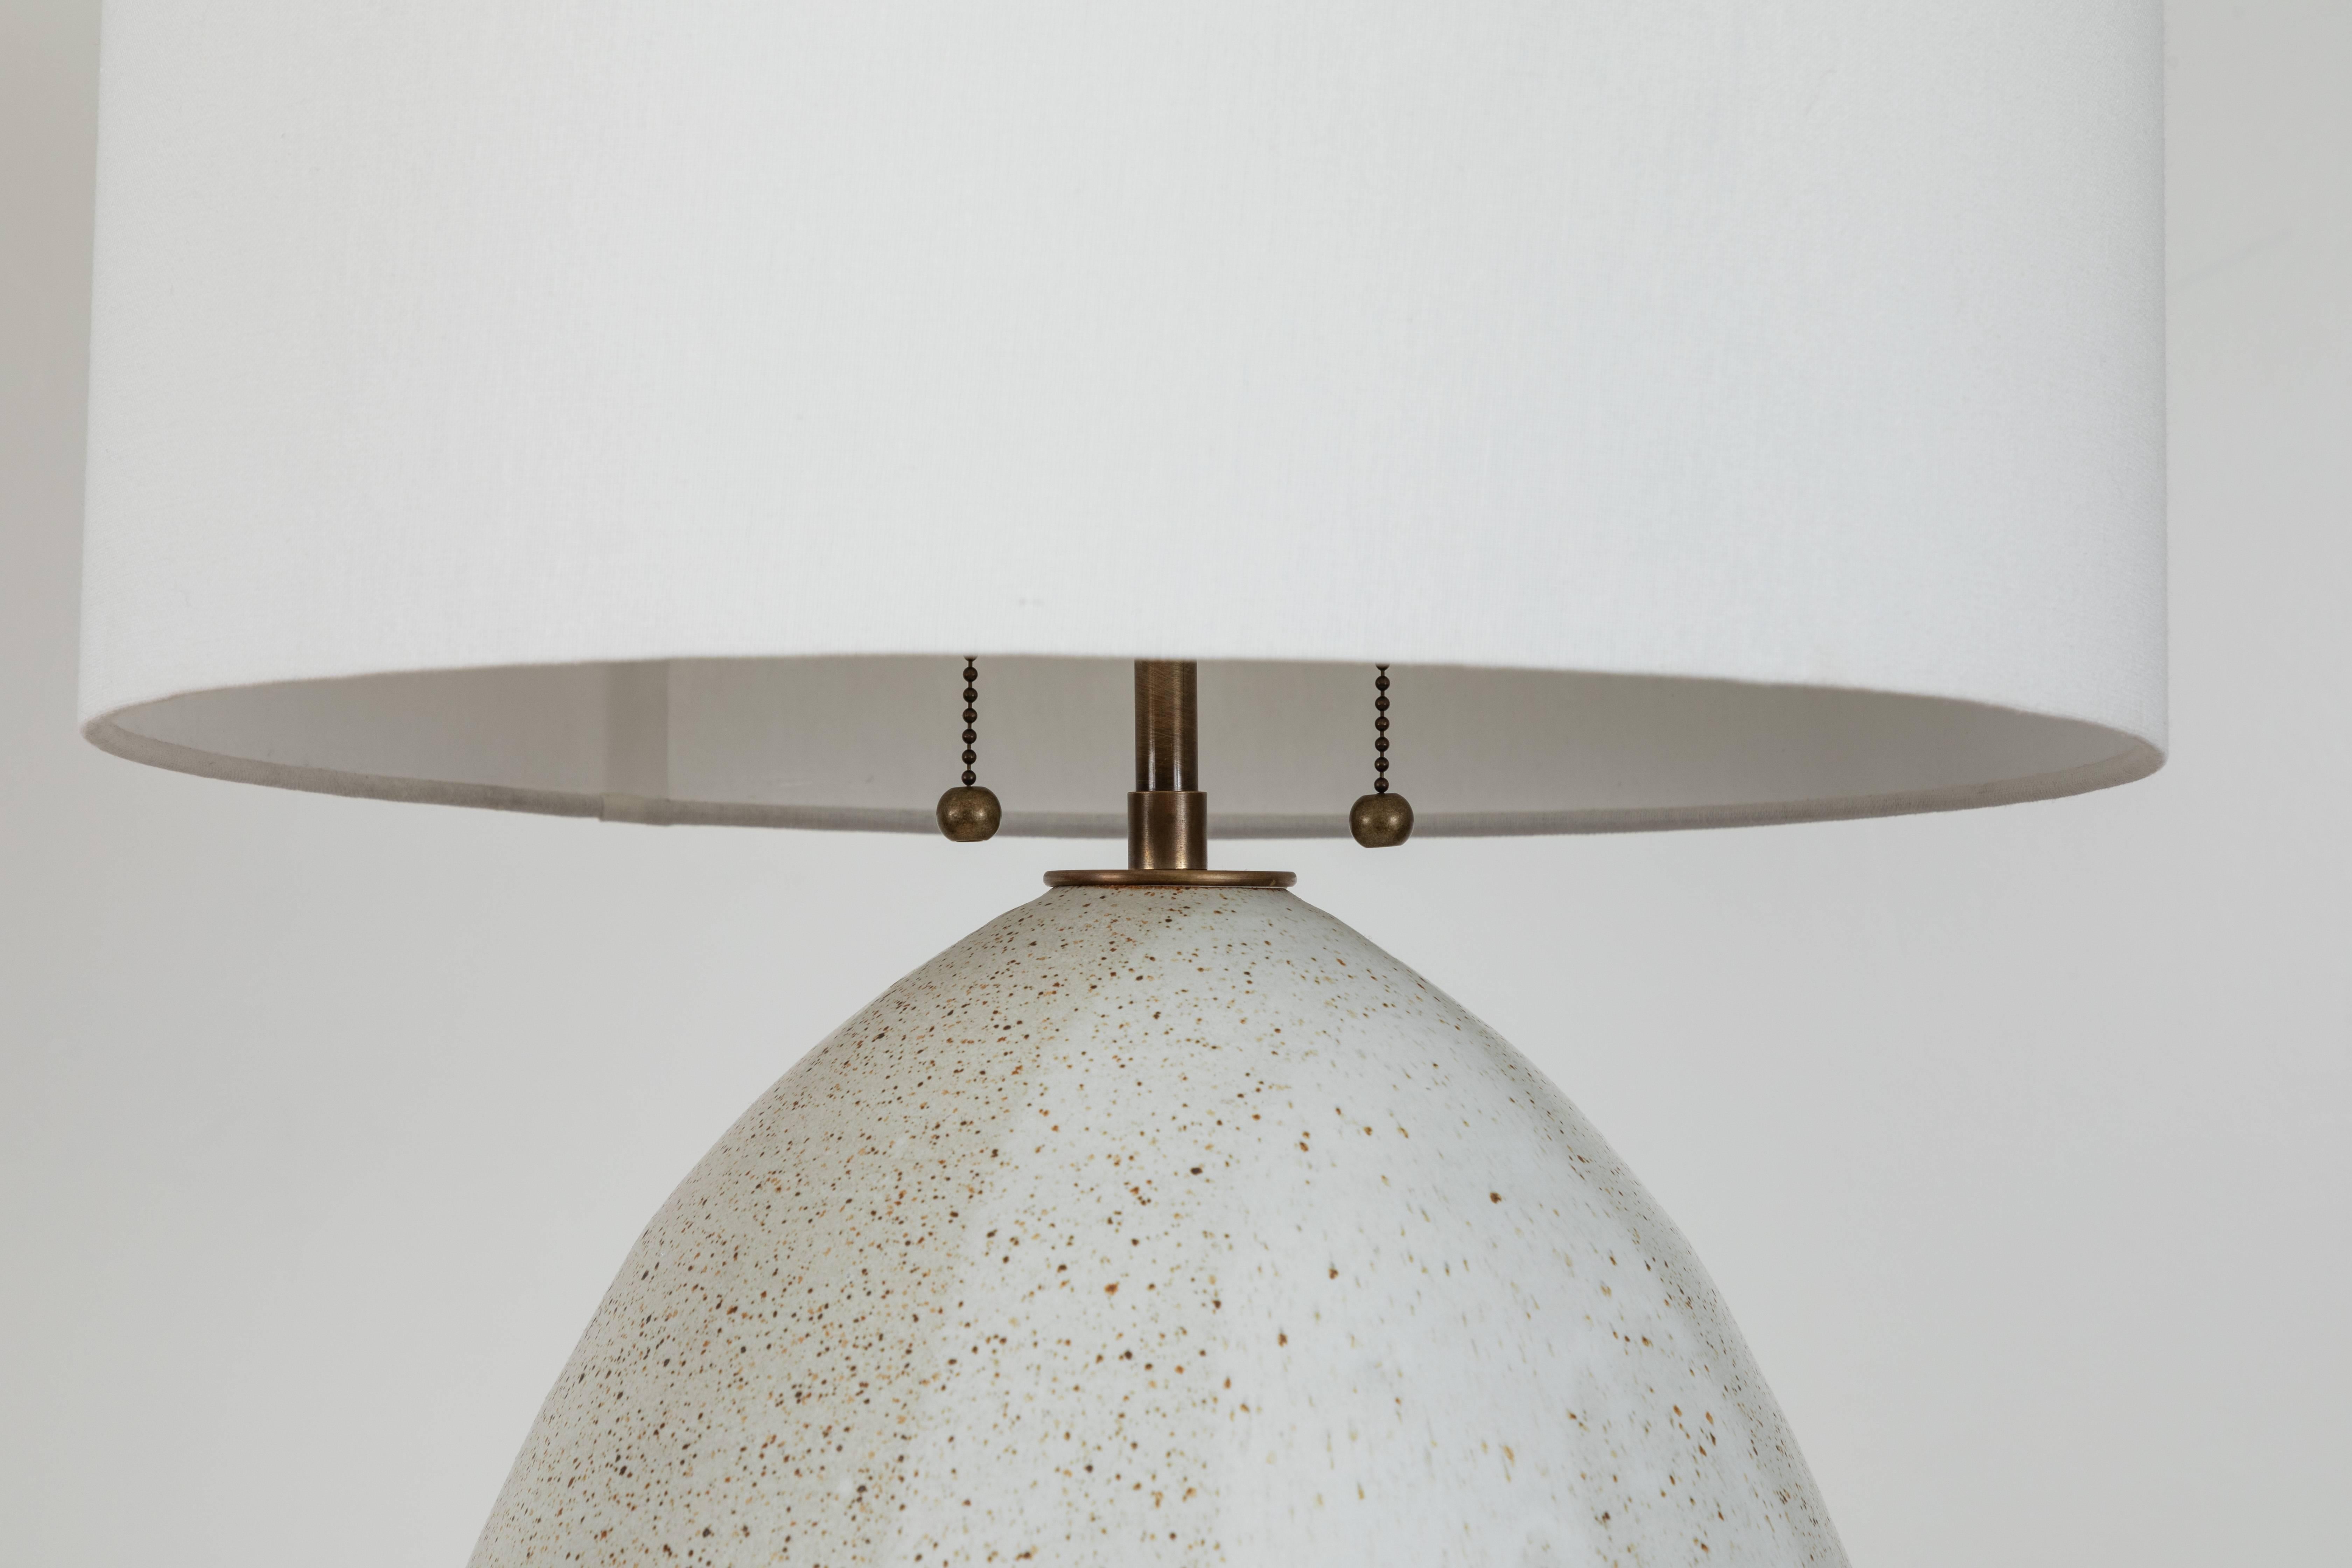 Ceramic Pair of Extra Large Pod Lamps by Victoria Morris for Lawson-Fenning